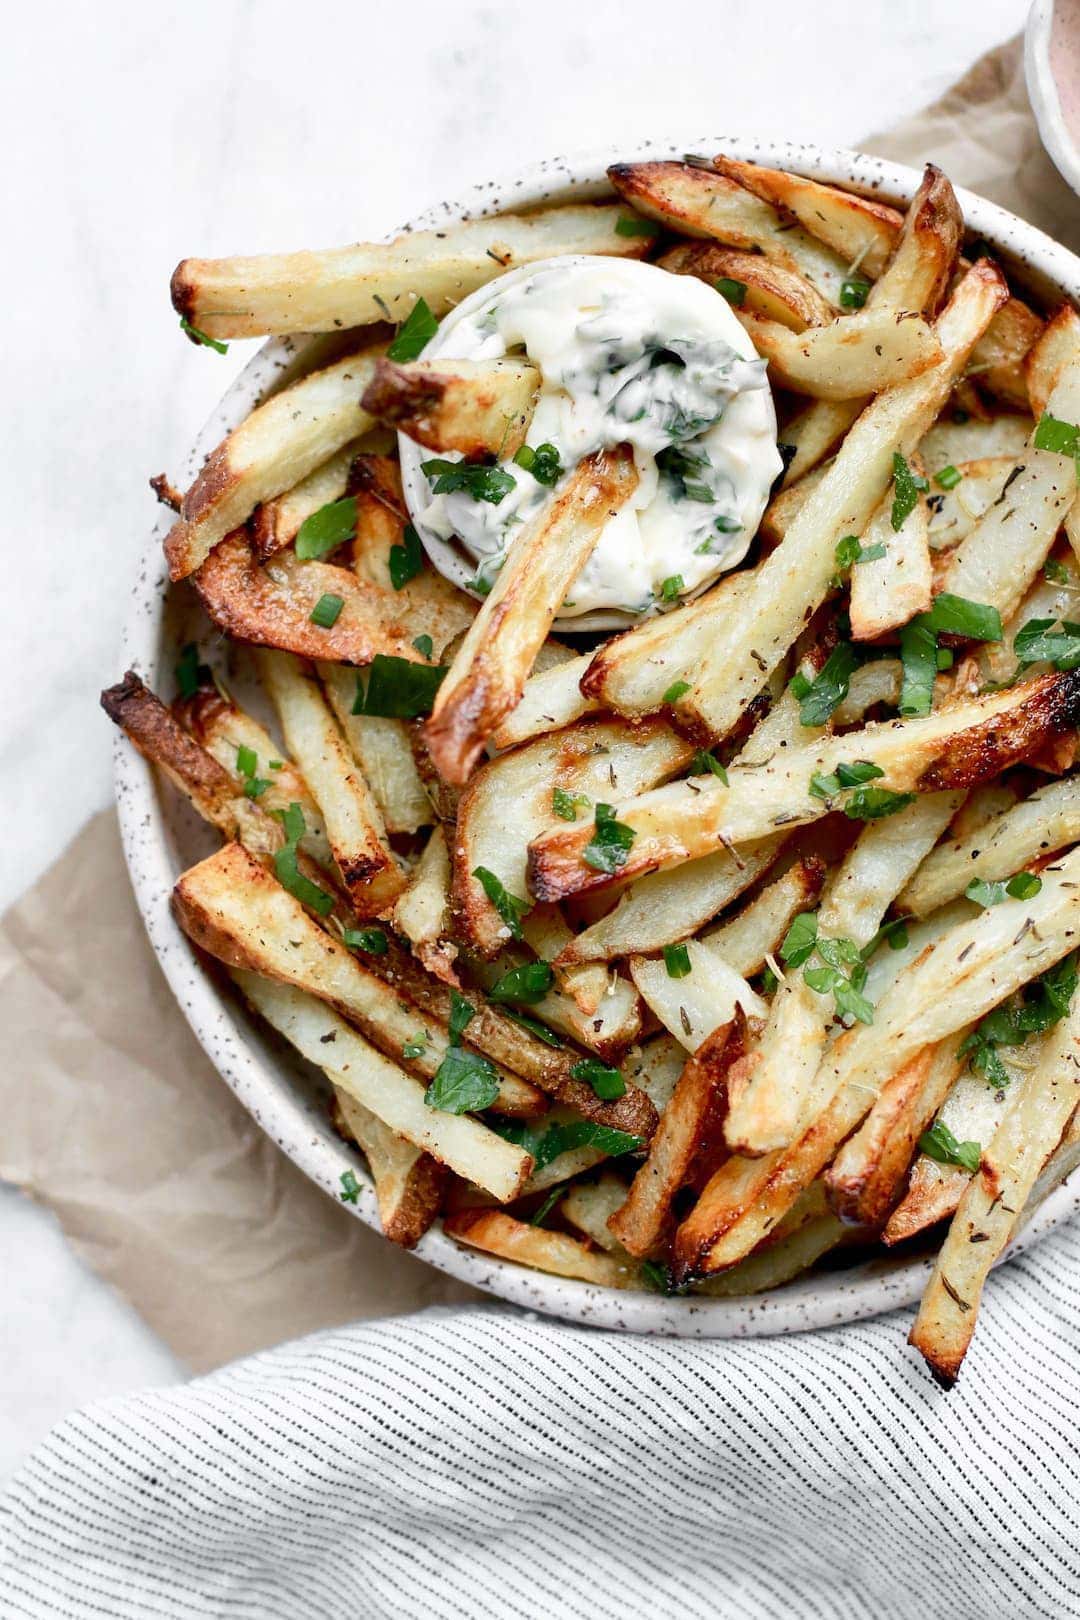 Herb Oven Baked Fries - 18 Delicious Low Fodmap Snacks